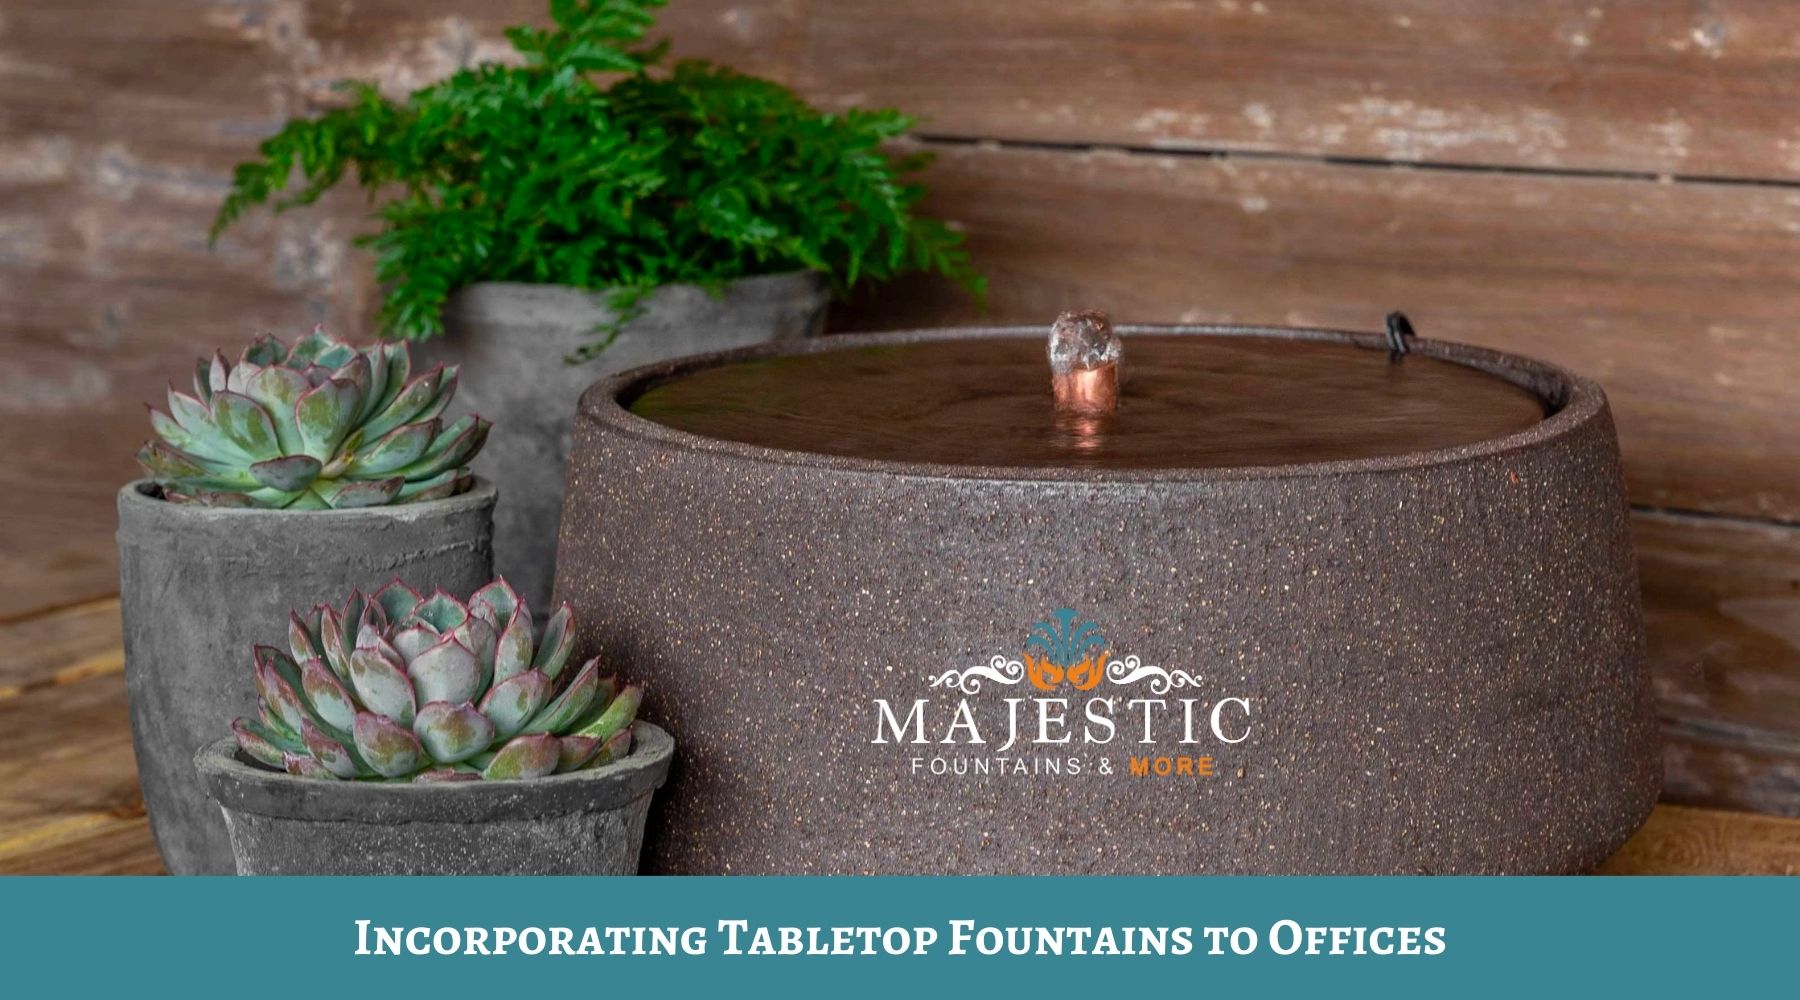 Incorporating Tabletop Fountains to Offices